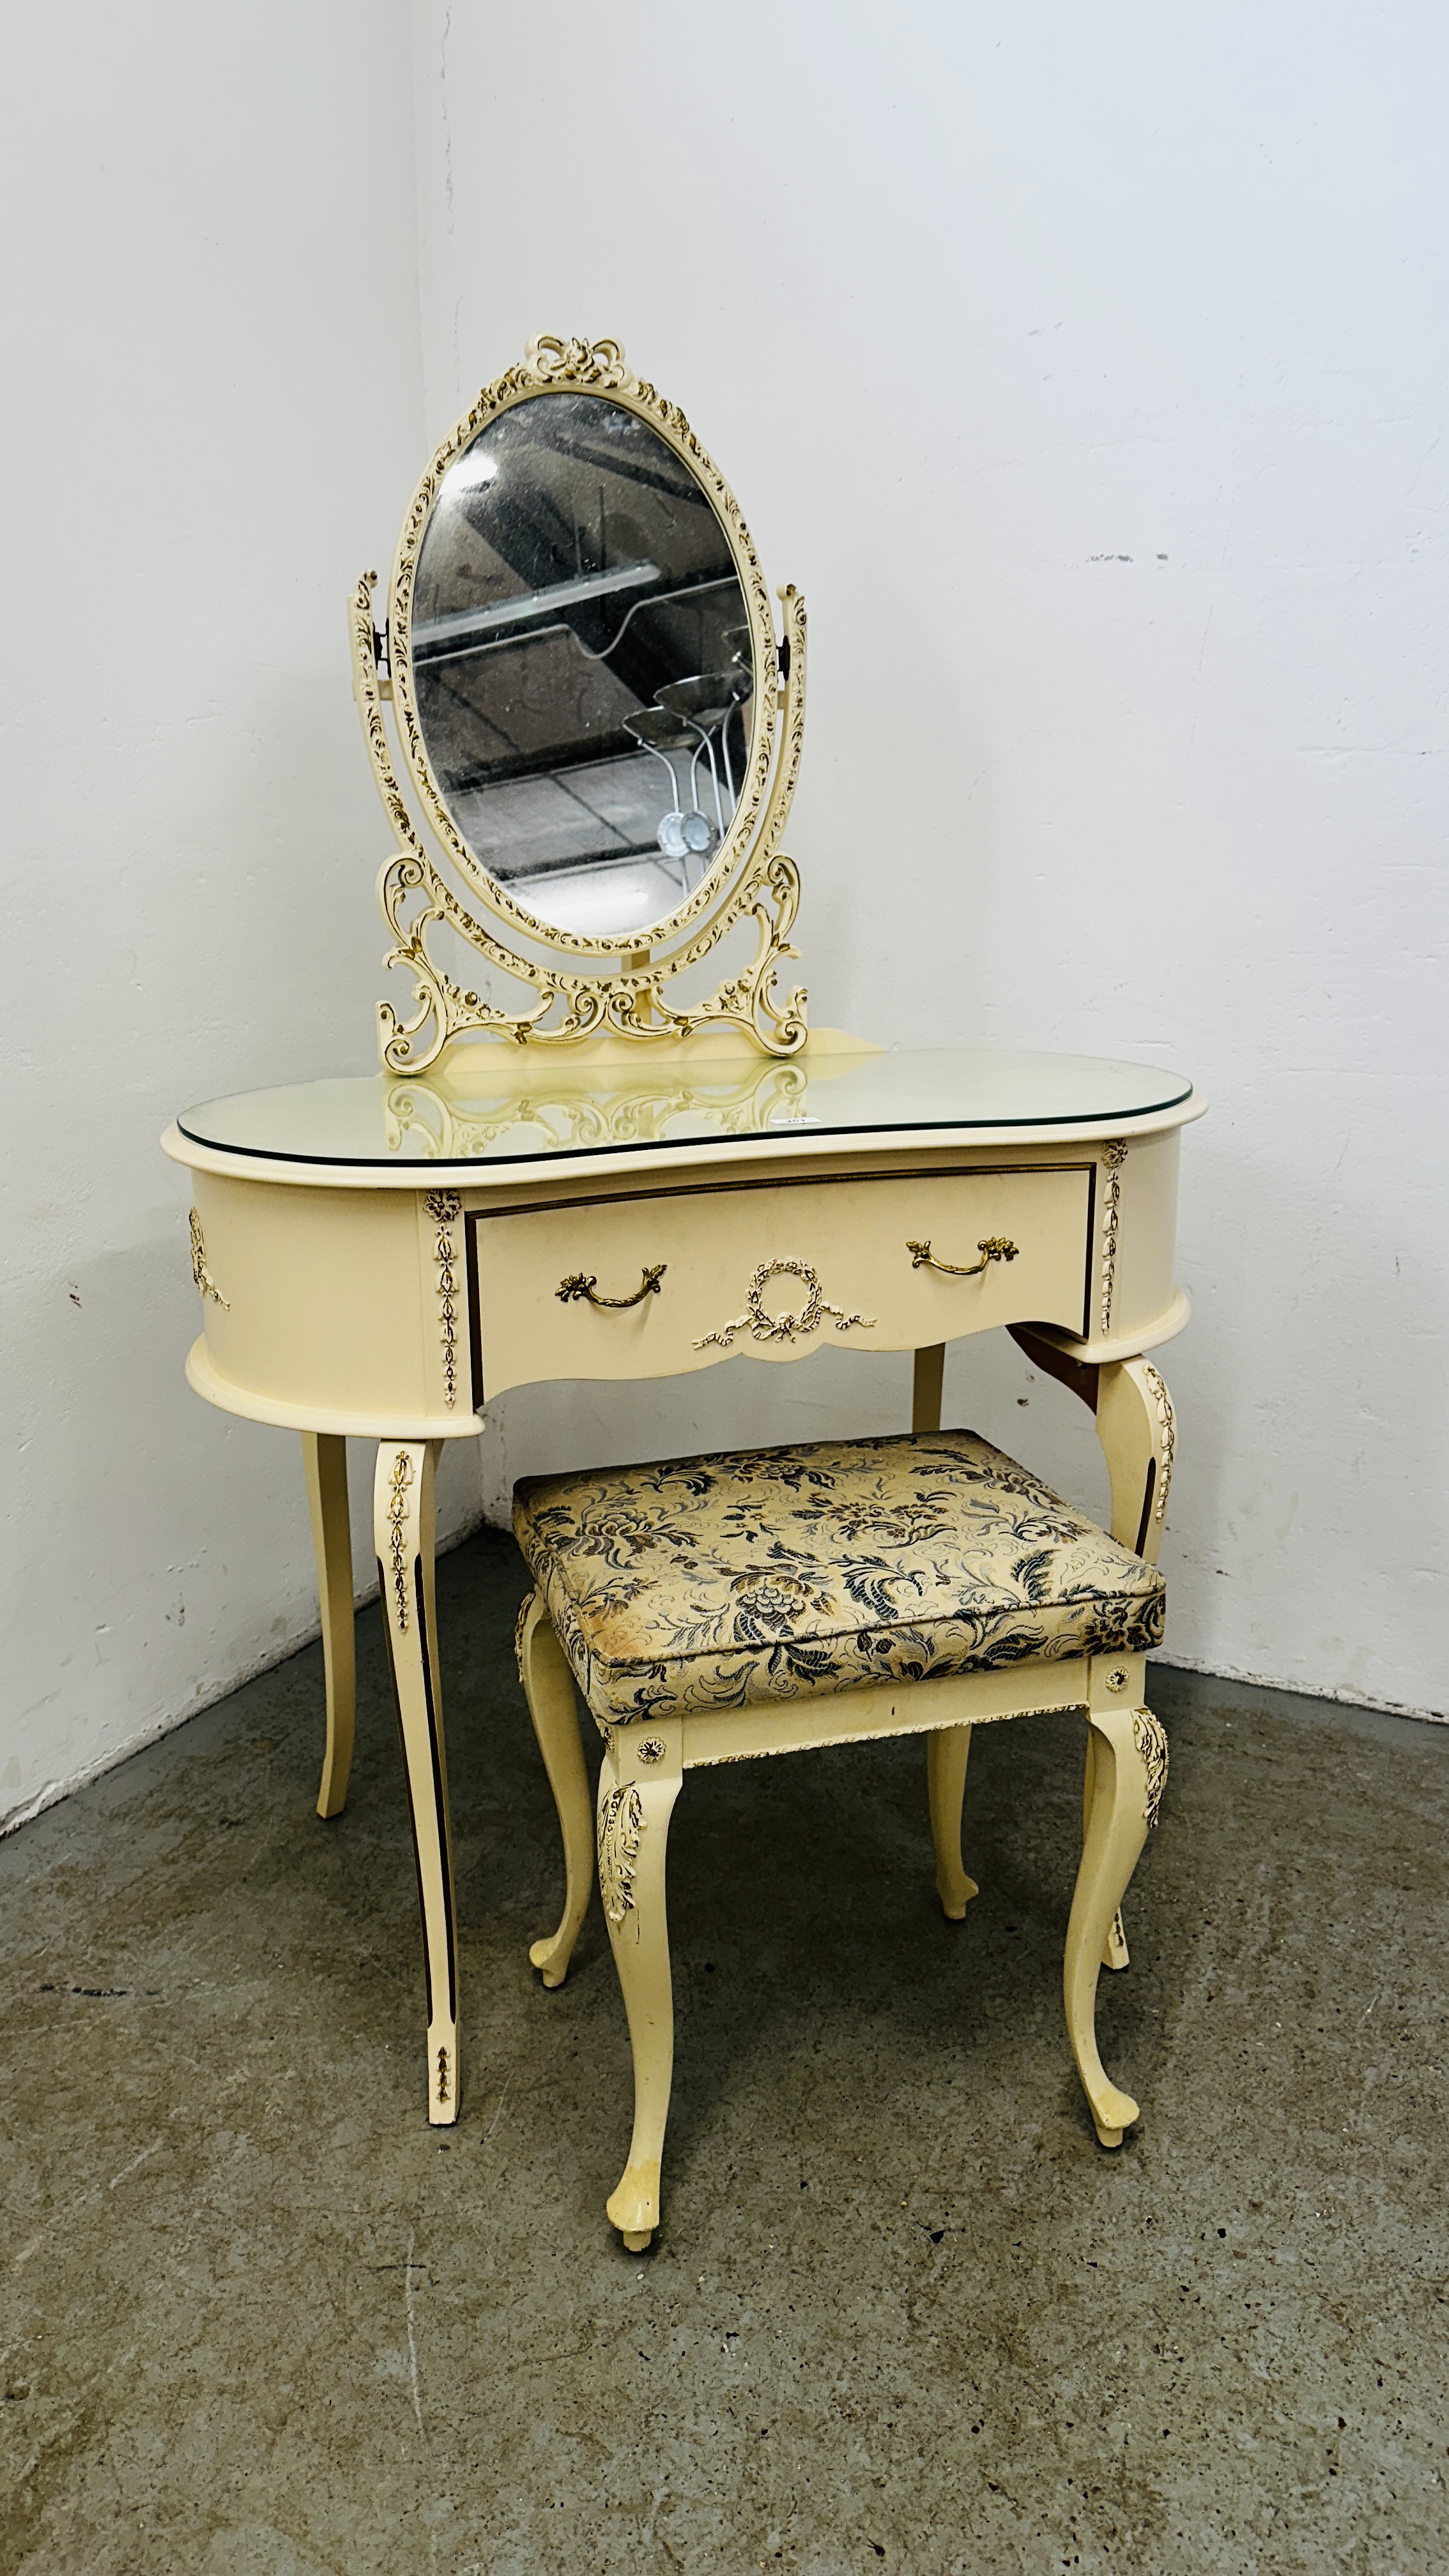 A CONTINENTAL DESIGN KIDNEY SHAPE CREAM FINISH DRESSING TABLE WITH MATCHING DRESSING STOOL,